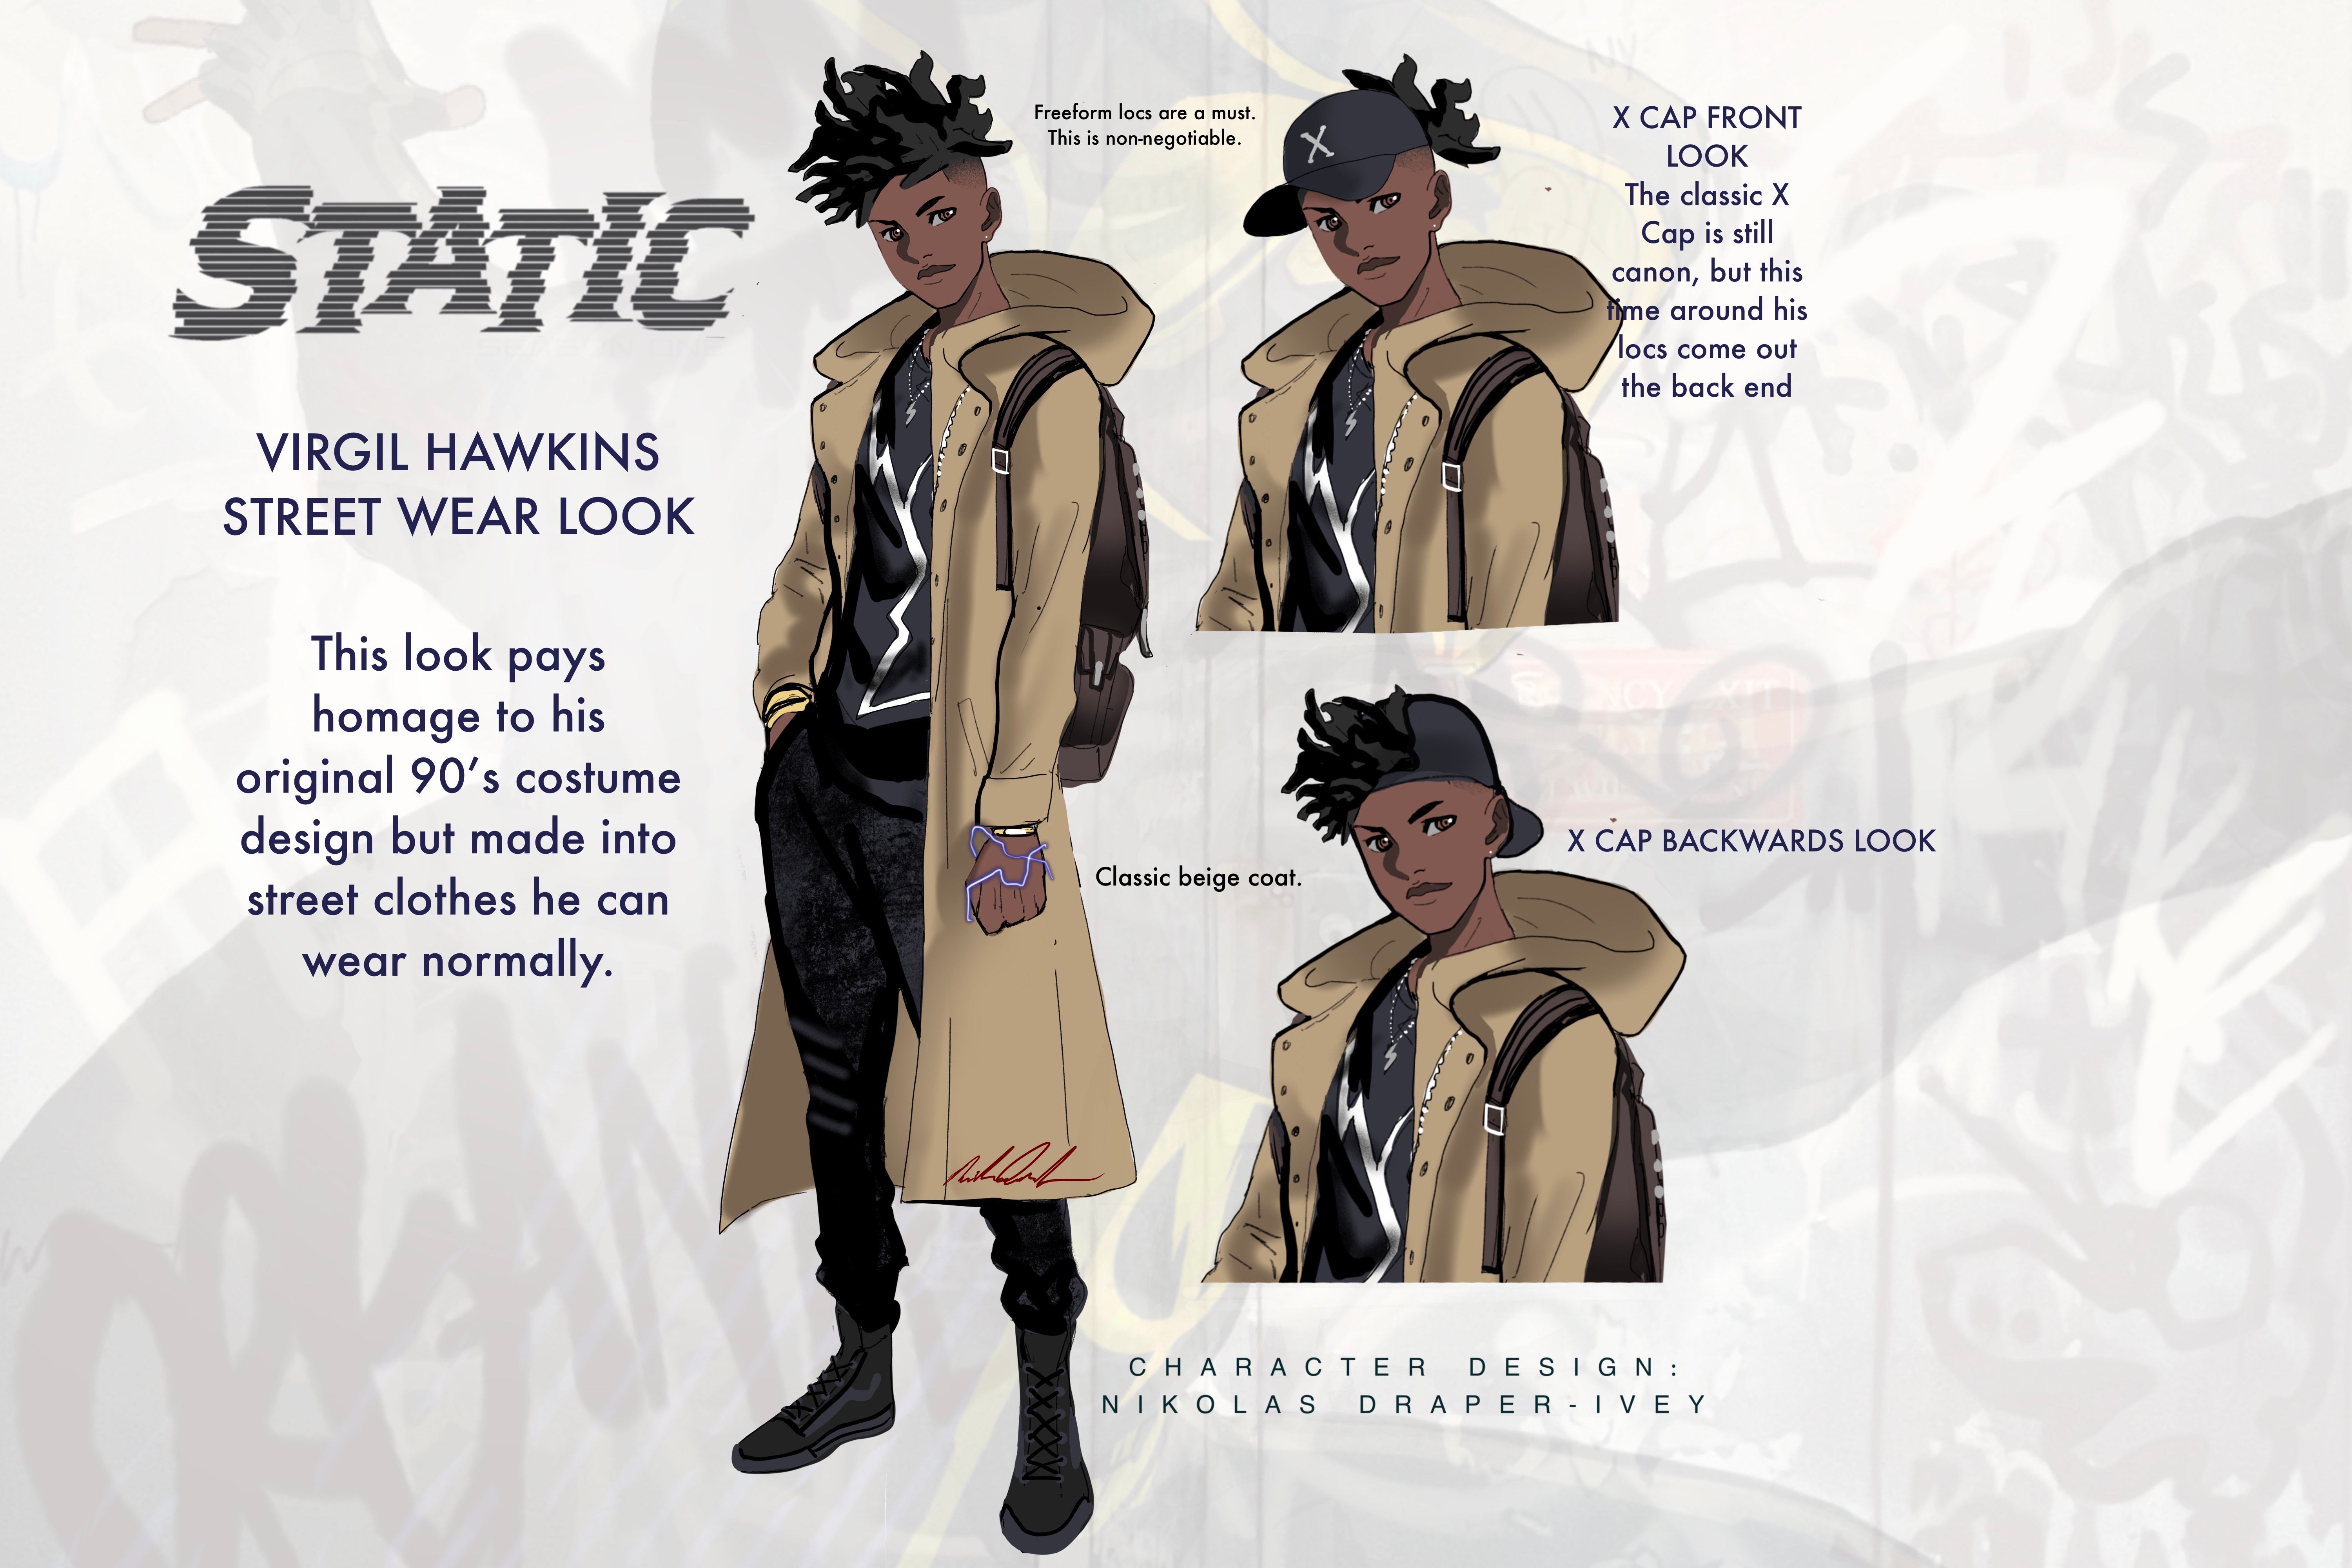 Static Shock Gets a New Costume for Season 2 Series